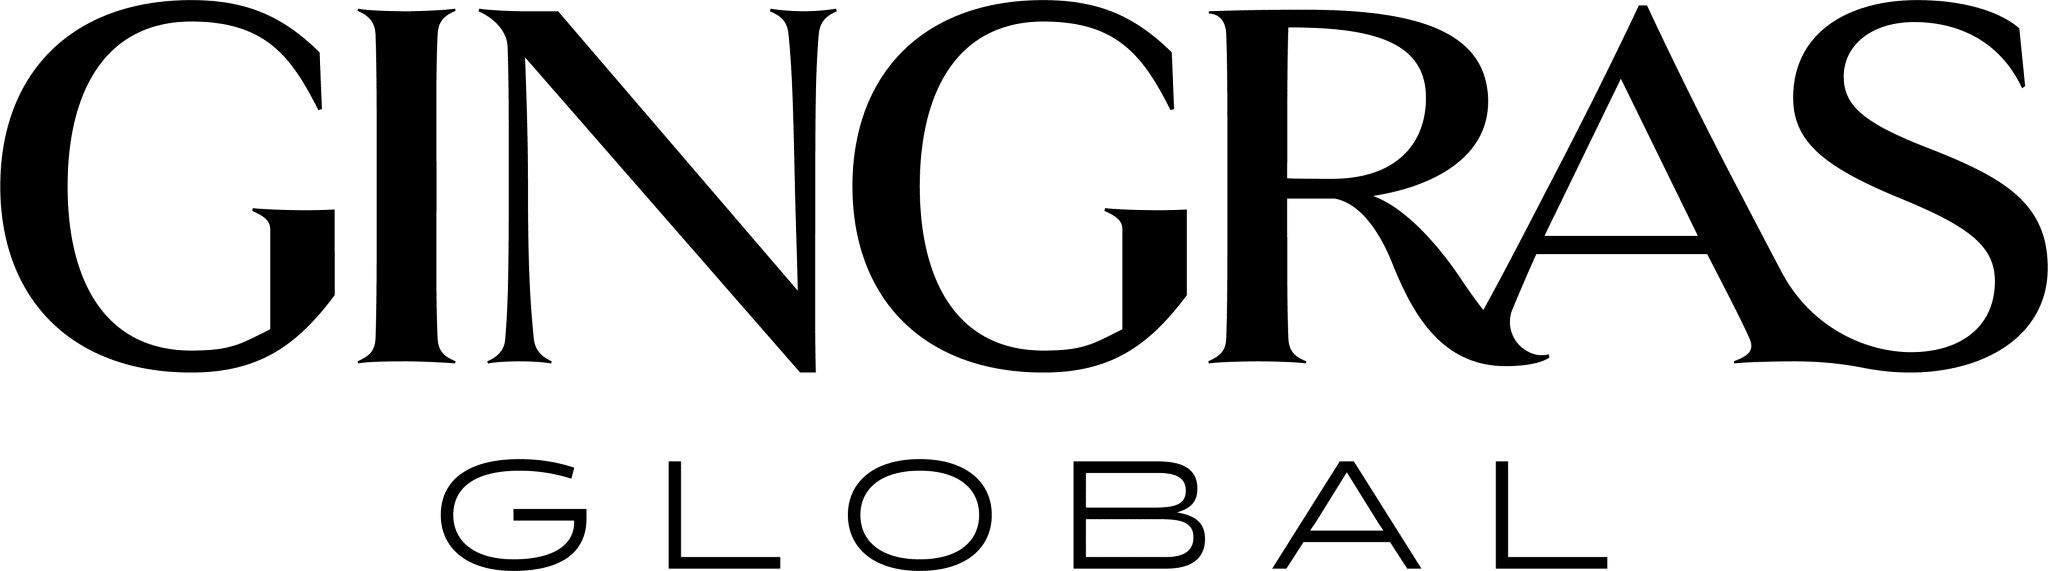 sponsors test - Christian Business Round Table | Gingras Global : 